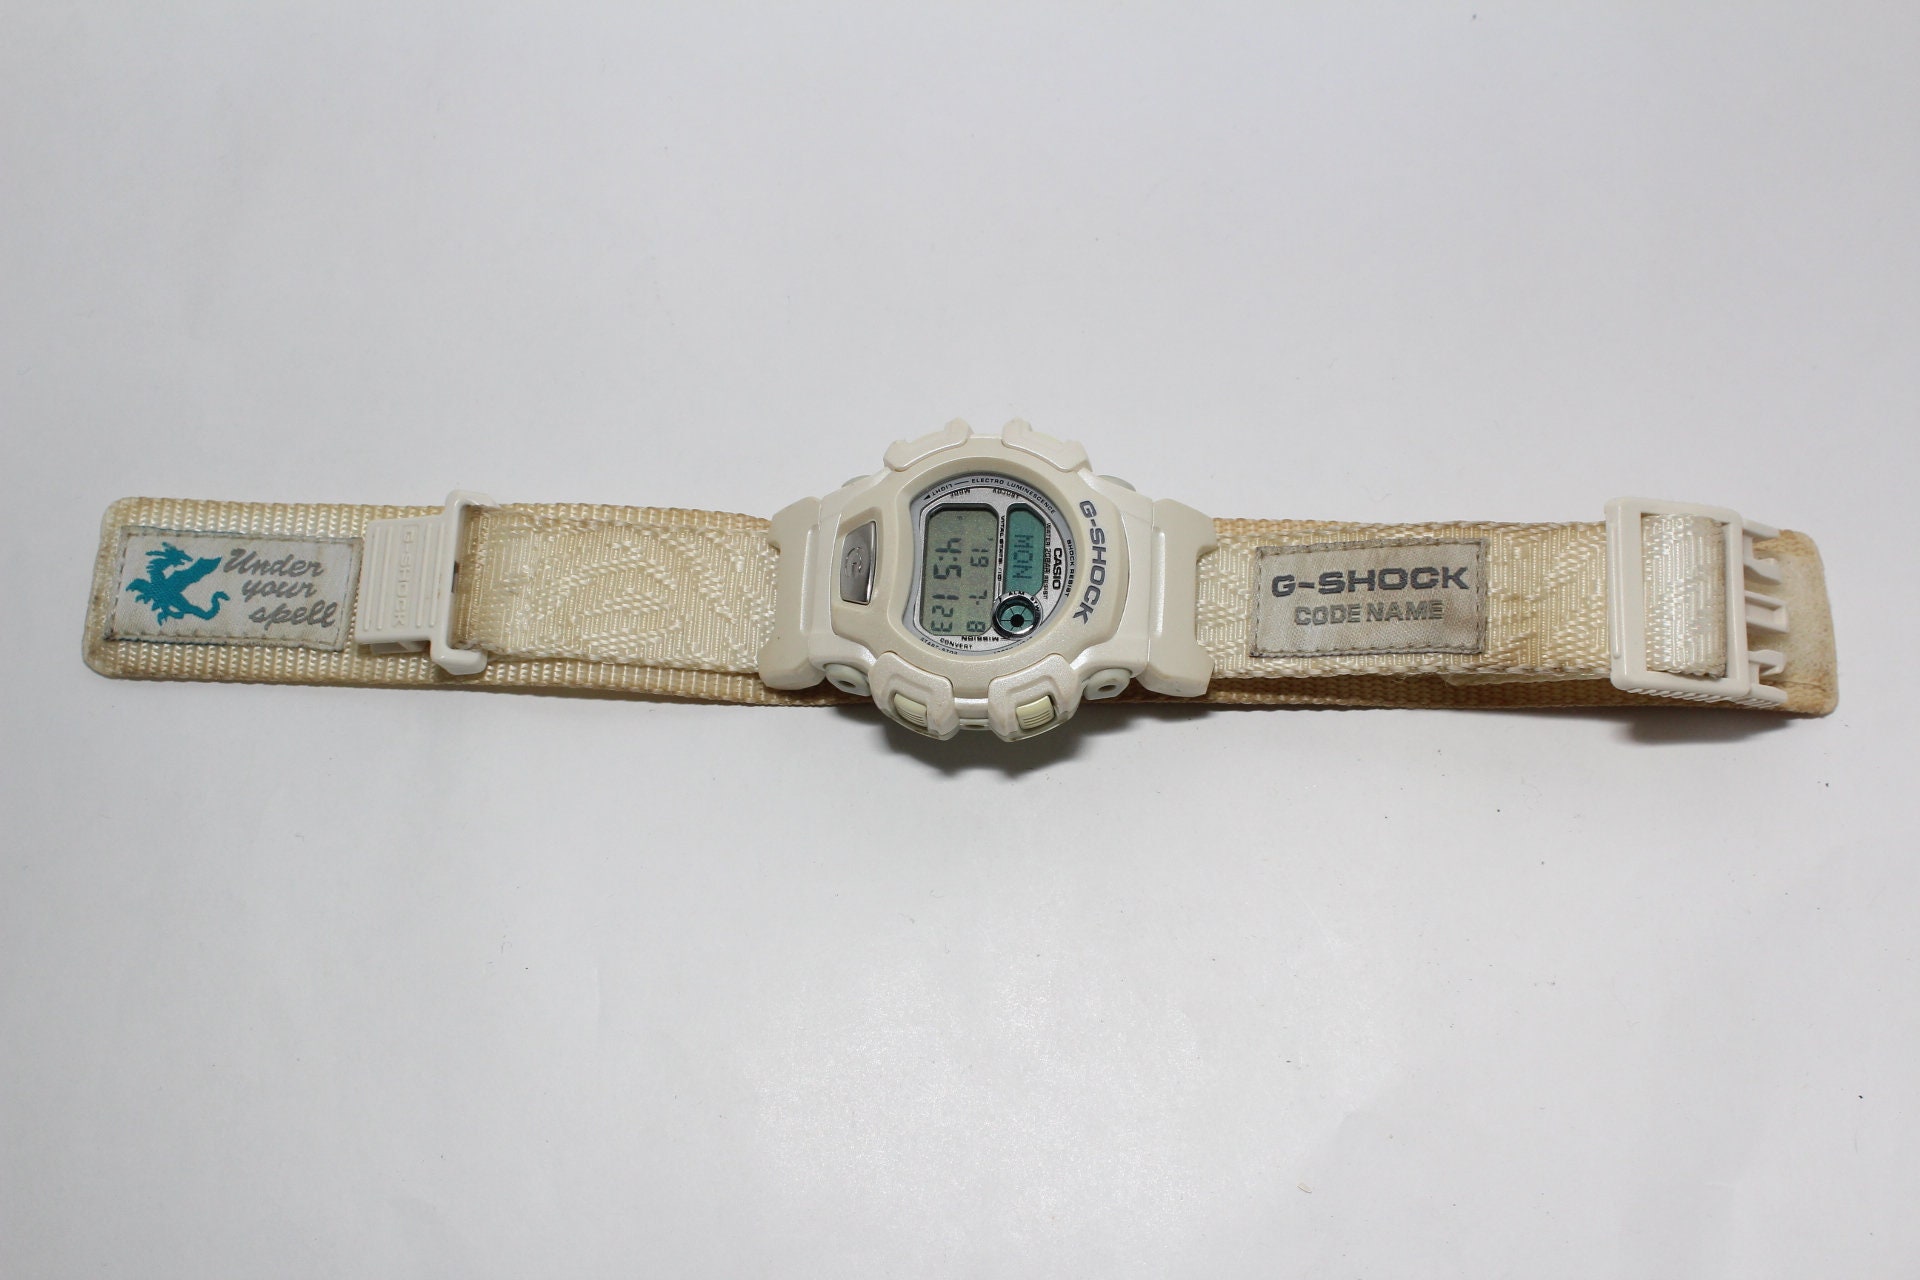 Dragon CASIO G-shock DW-0098 Code Name Lover's Collection